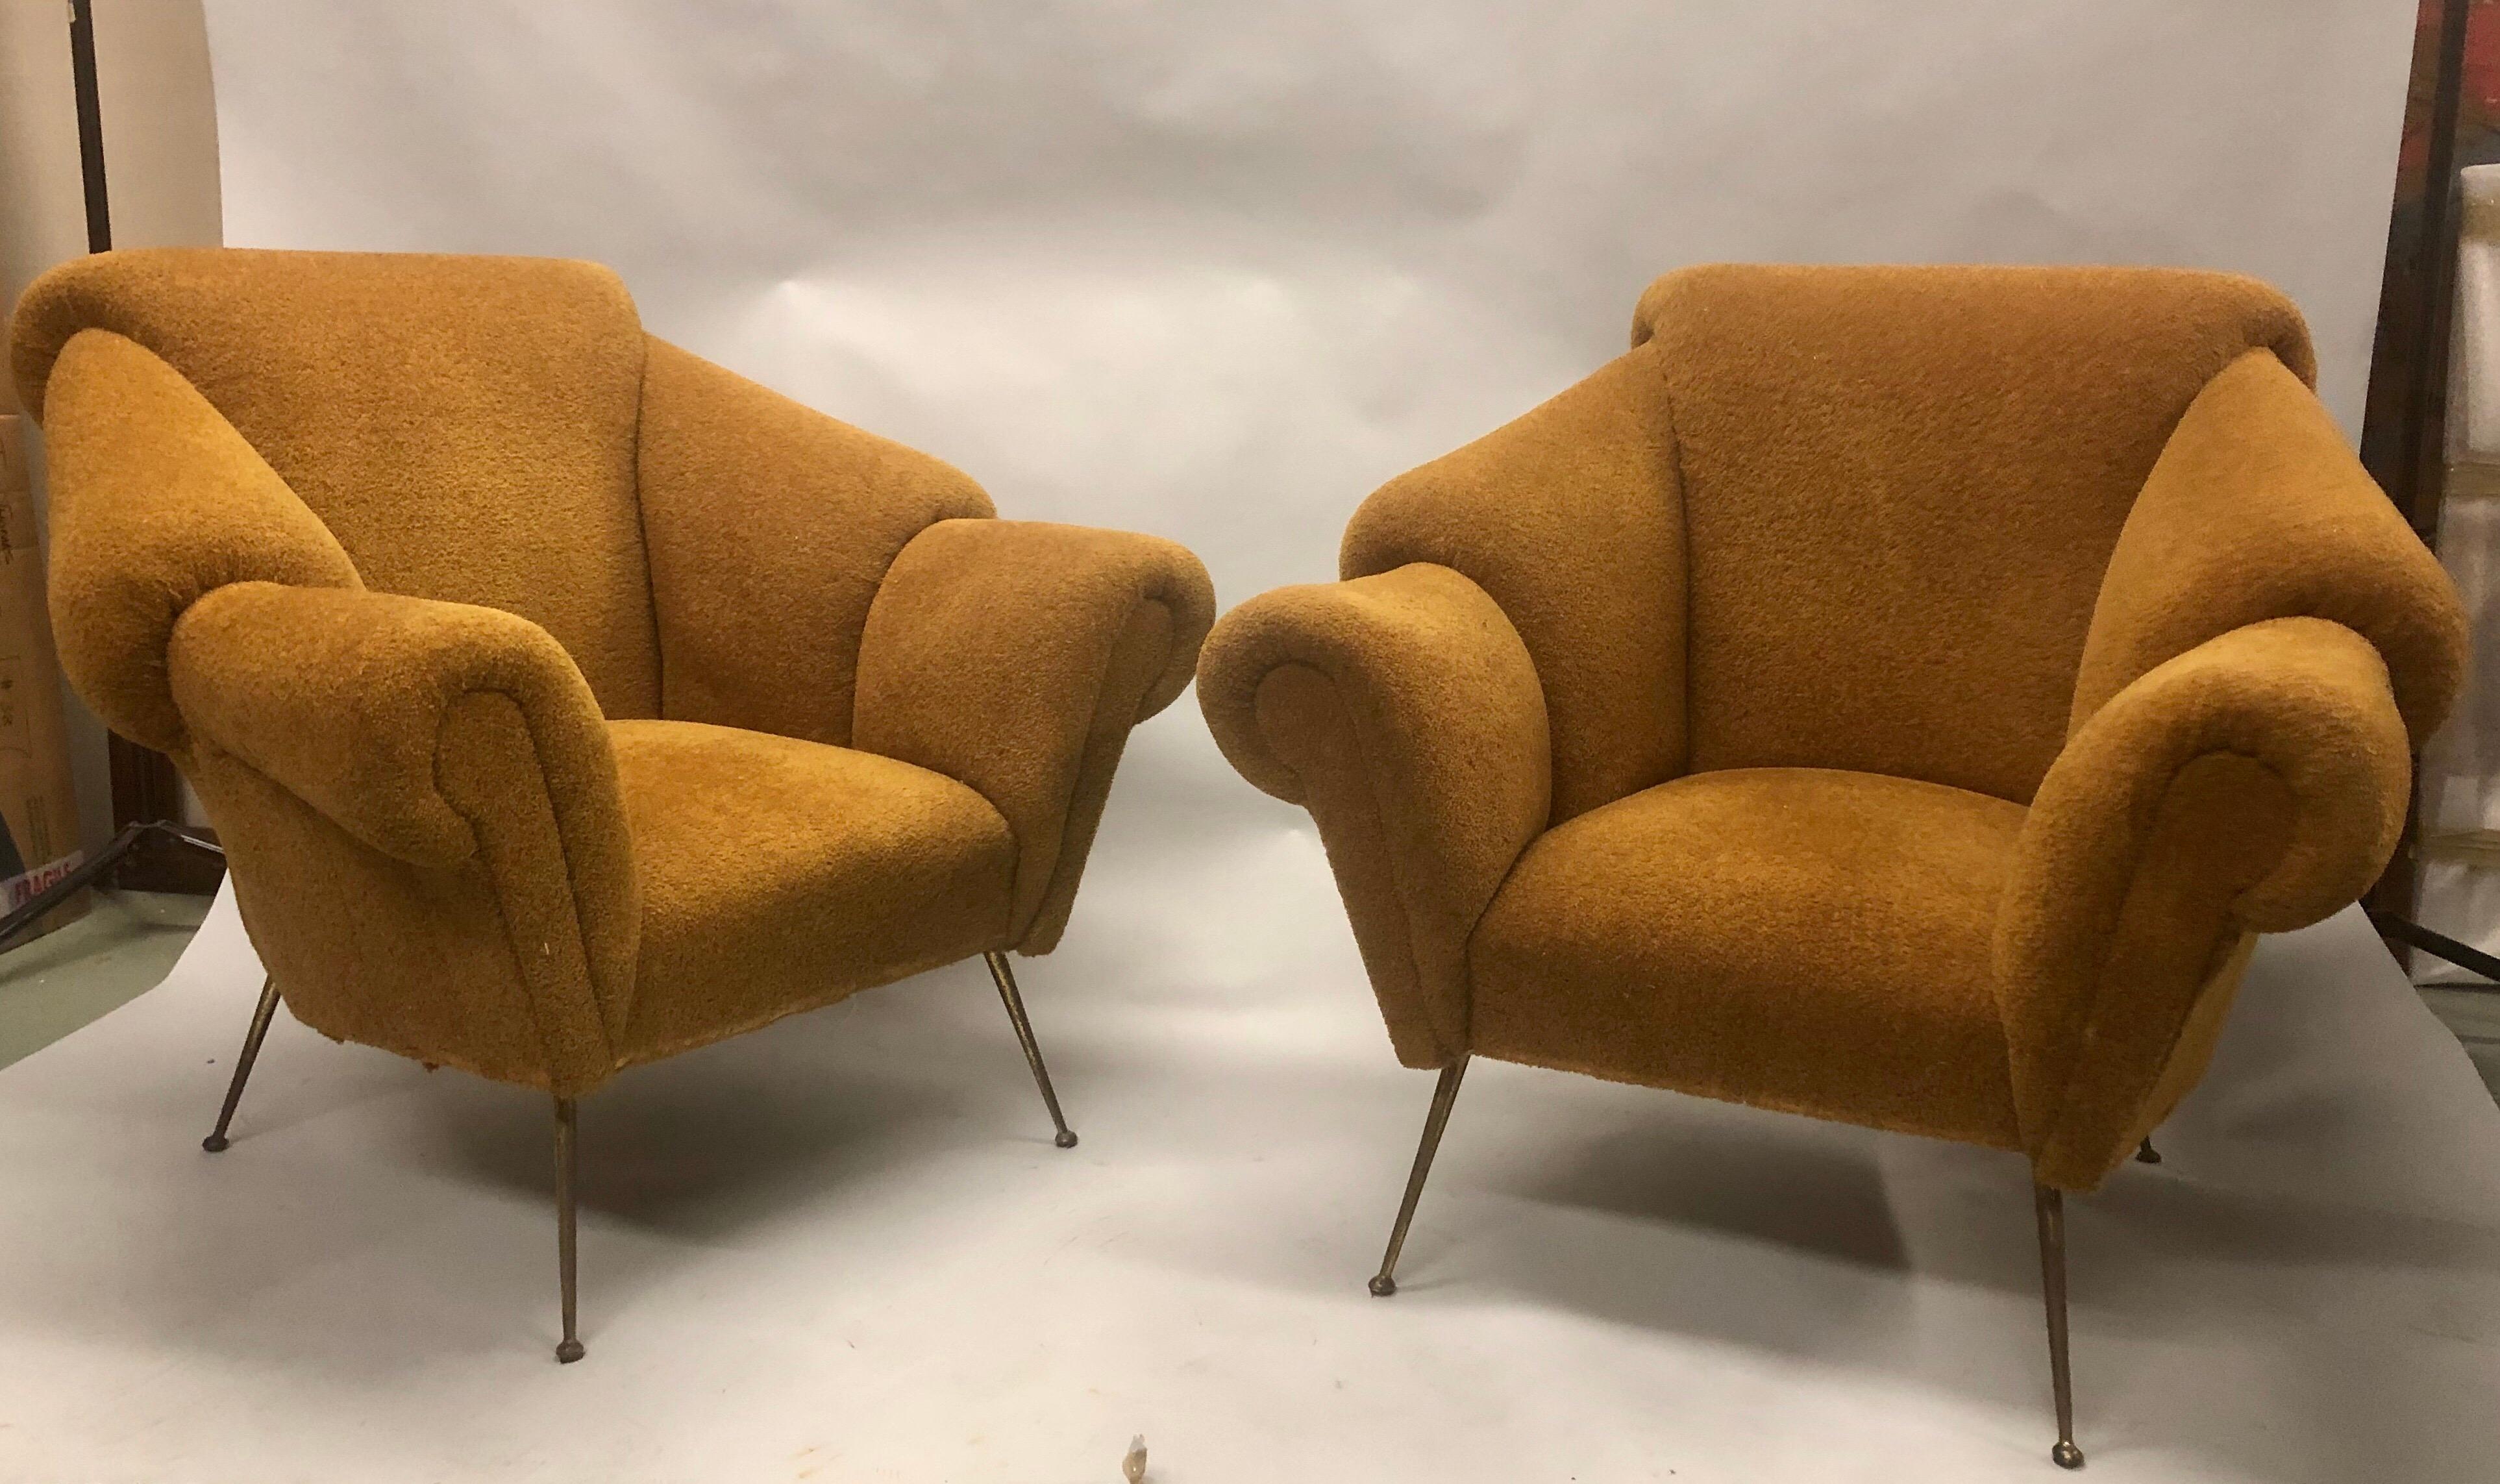 Rare and original pair of Italian Futurist lounge chairs / armchairs / wingback style chairs attributed to Giacomo Balla with stunning layered, sequential arms that convey speed and continual movement. 

The pair is set upon tapered brass legs.